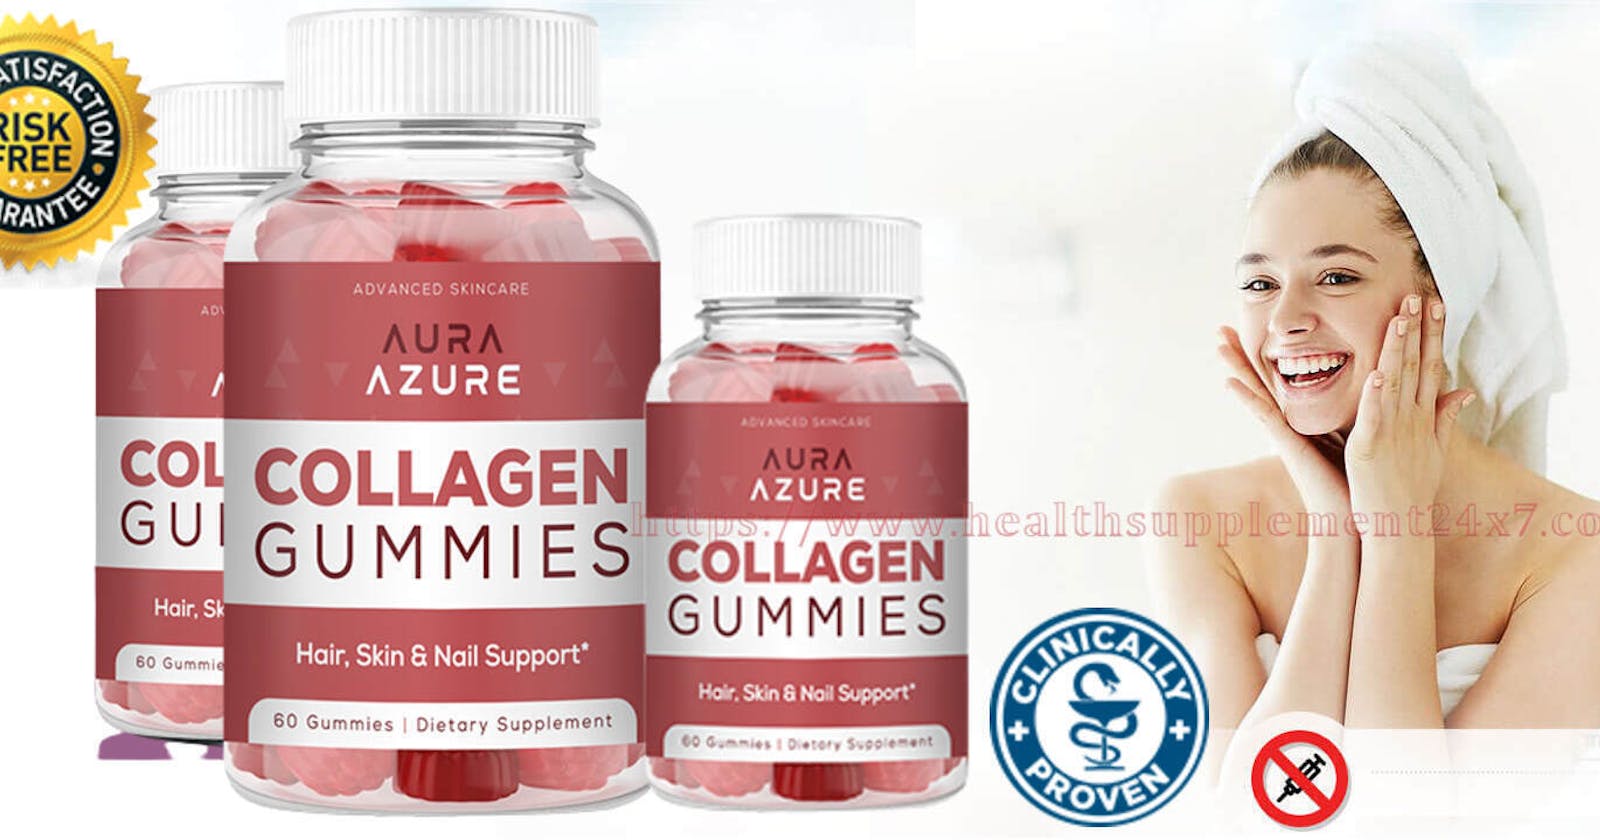 Aura Azure Anti-Aging Gummies [100% Result Guaranteed] Skincare & Beauty | Reduces Wrinkles & Fine Lines(WORK OR HOAX)